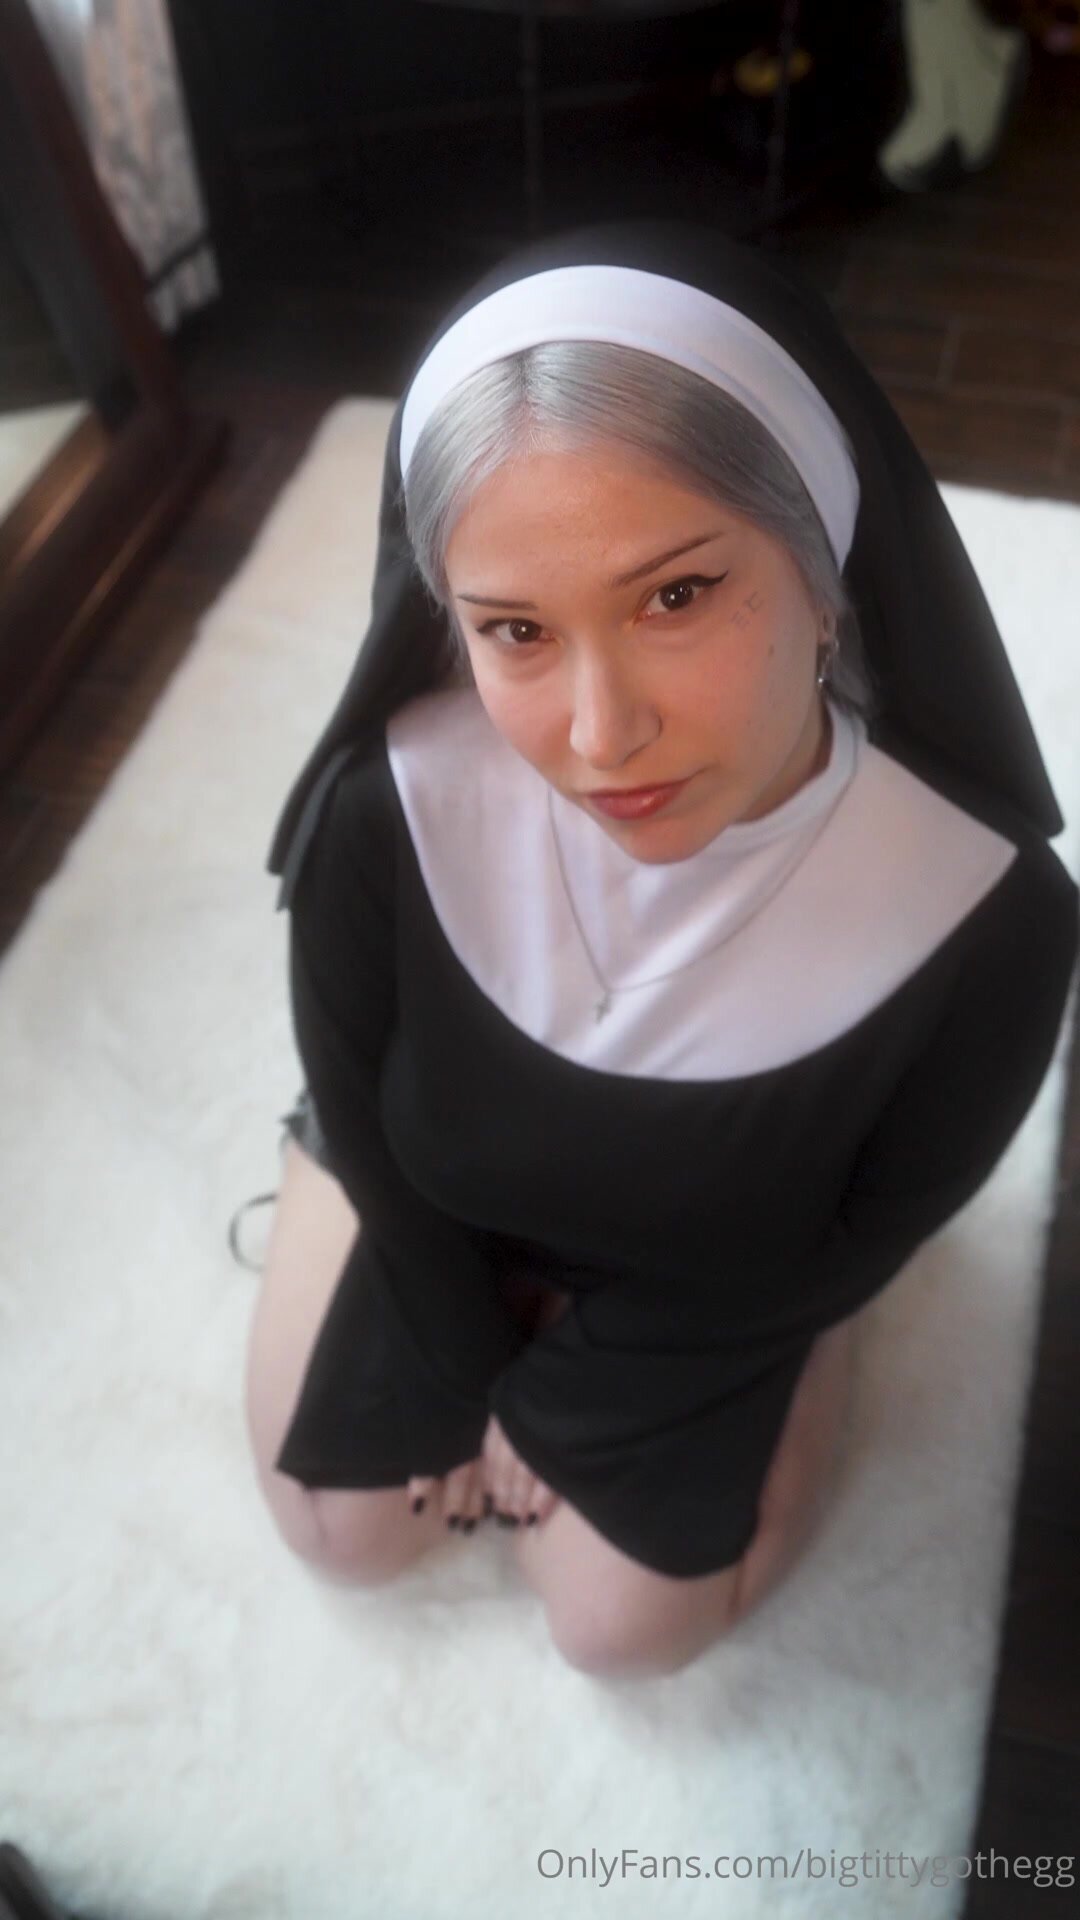 Bigtittygothegg - Whore joins the nunnery